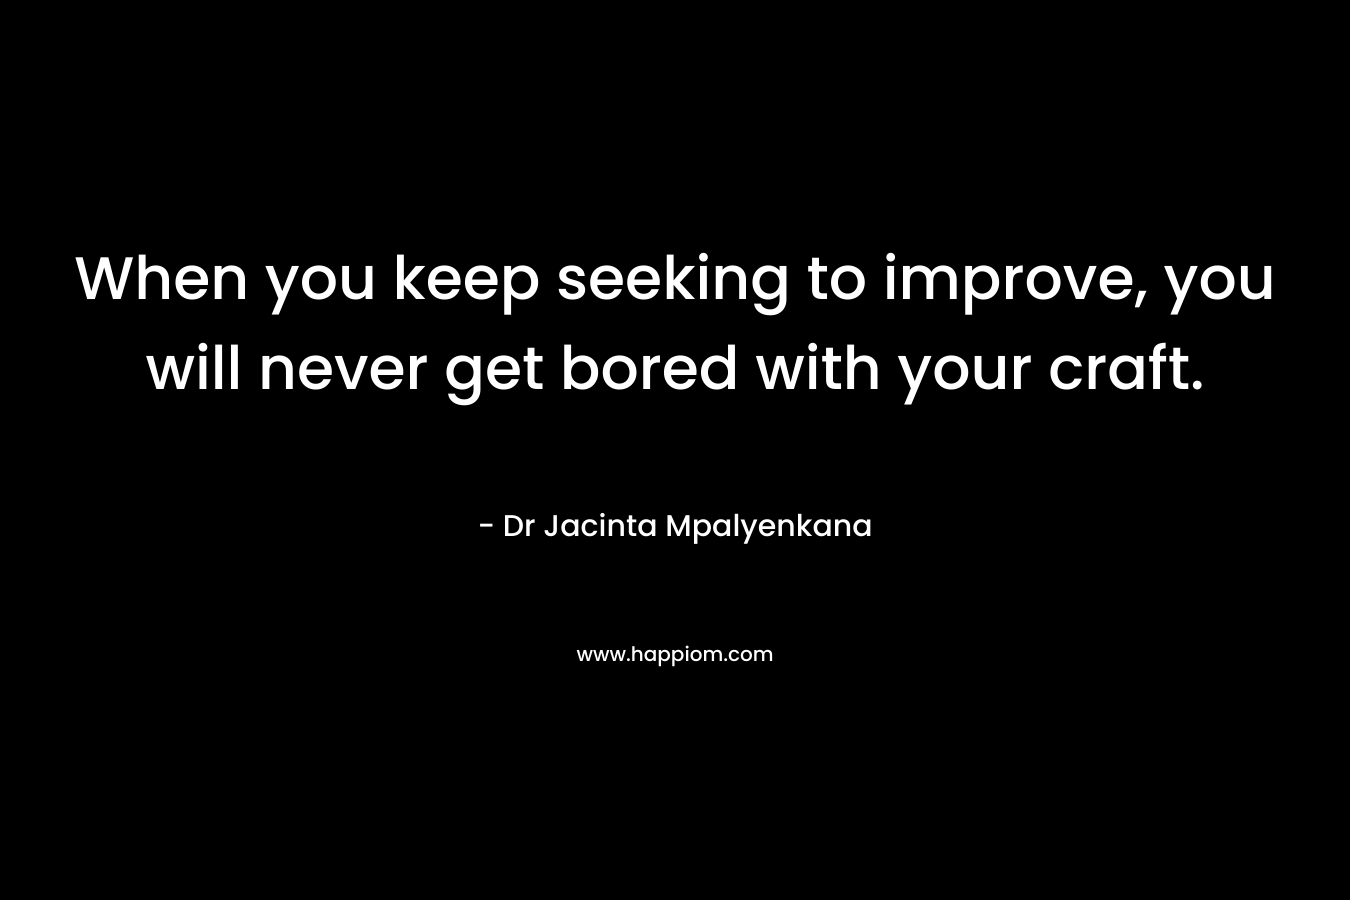 When you keep seeking to improve, you will never get bored with your craft. – Dr Jacinta Mpalyenkana